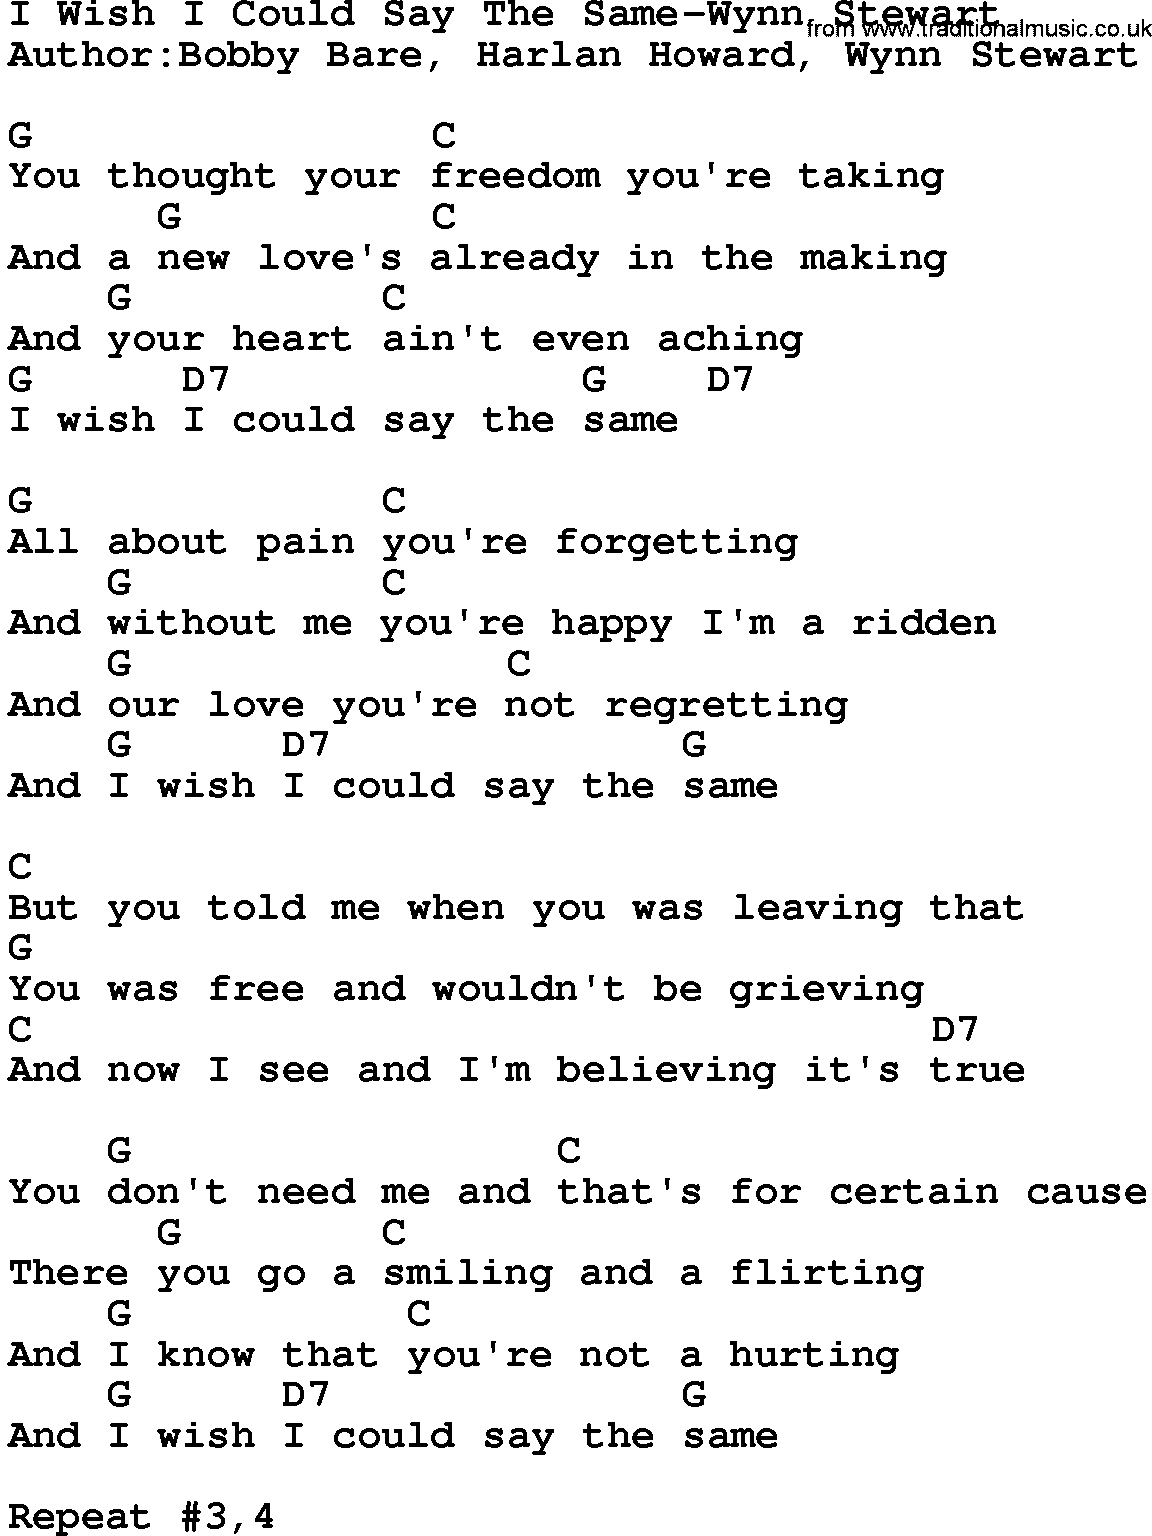 Country music song: I Wish I Could Say The Same-Wynn Stewart lyrics and chords